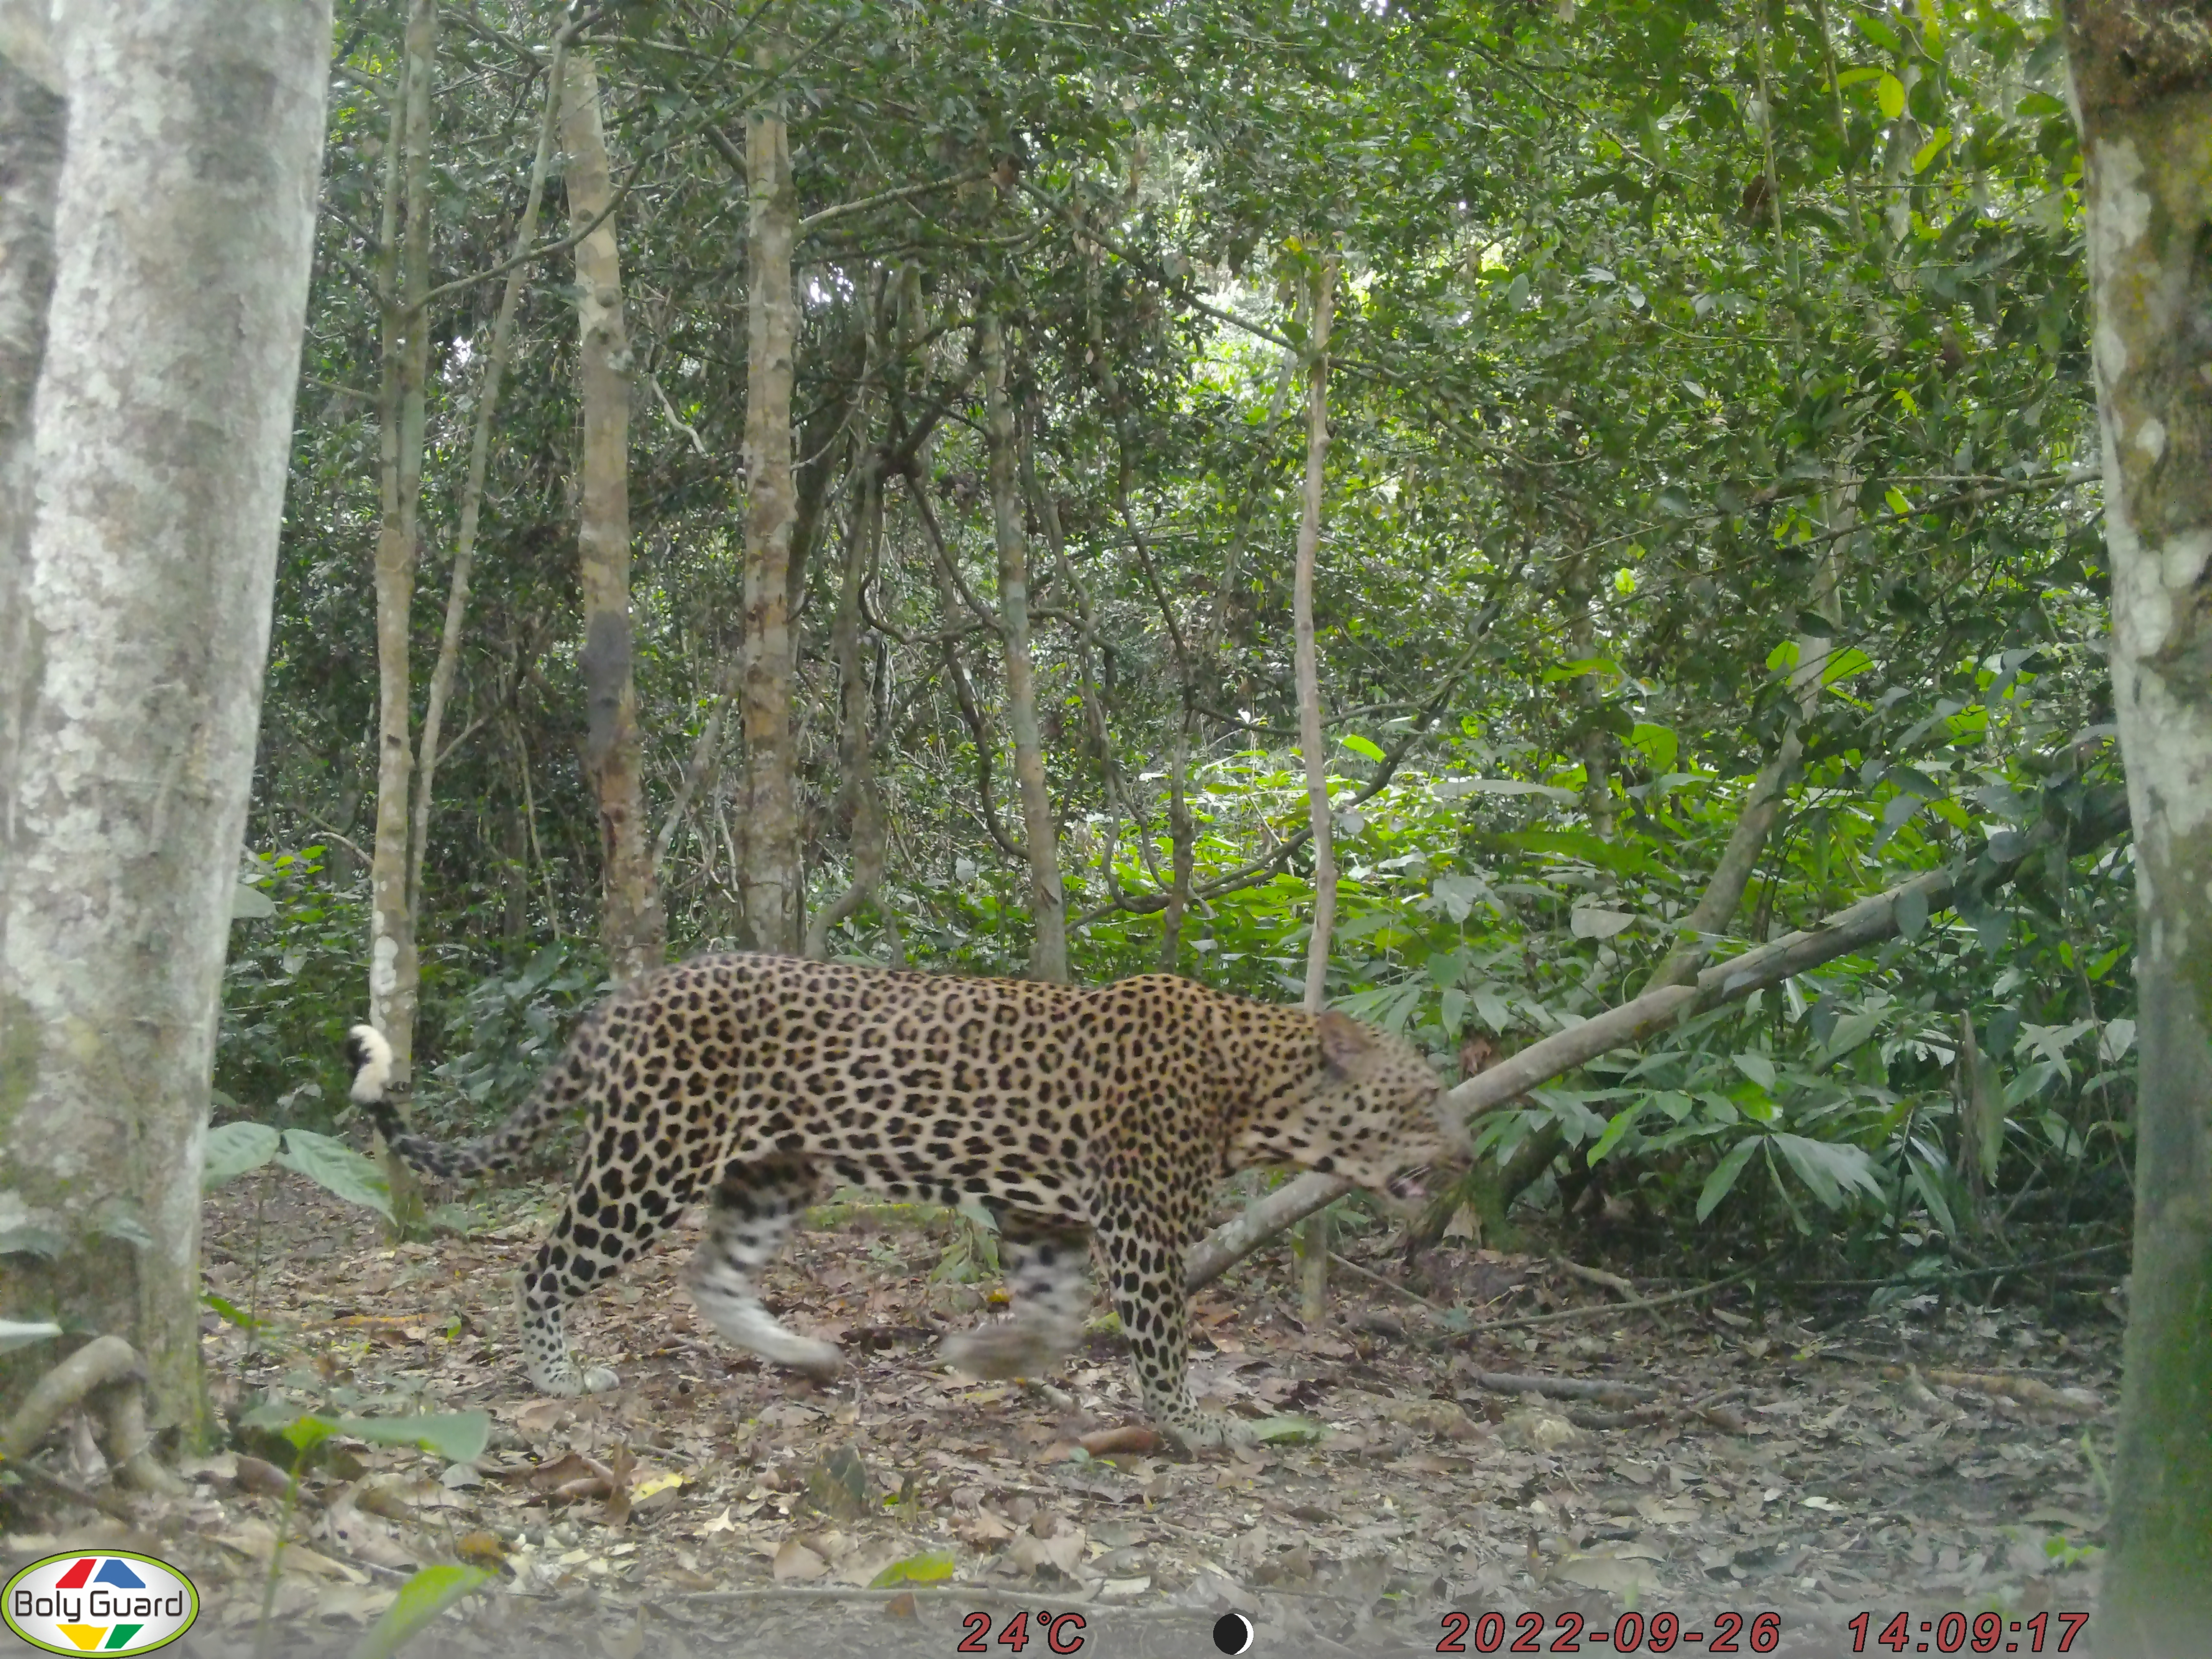 A male leopard captured by one of our camera traps.